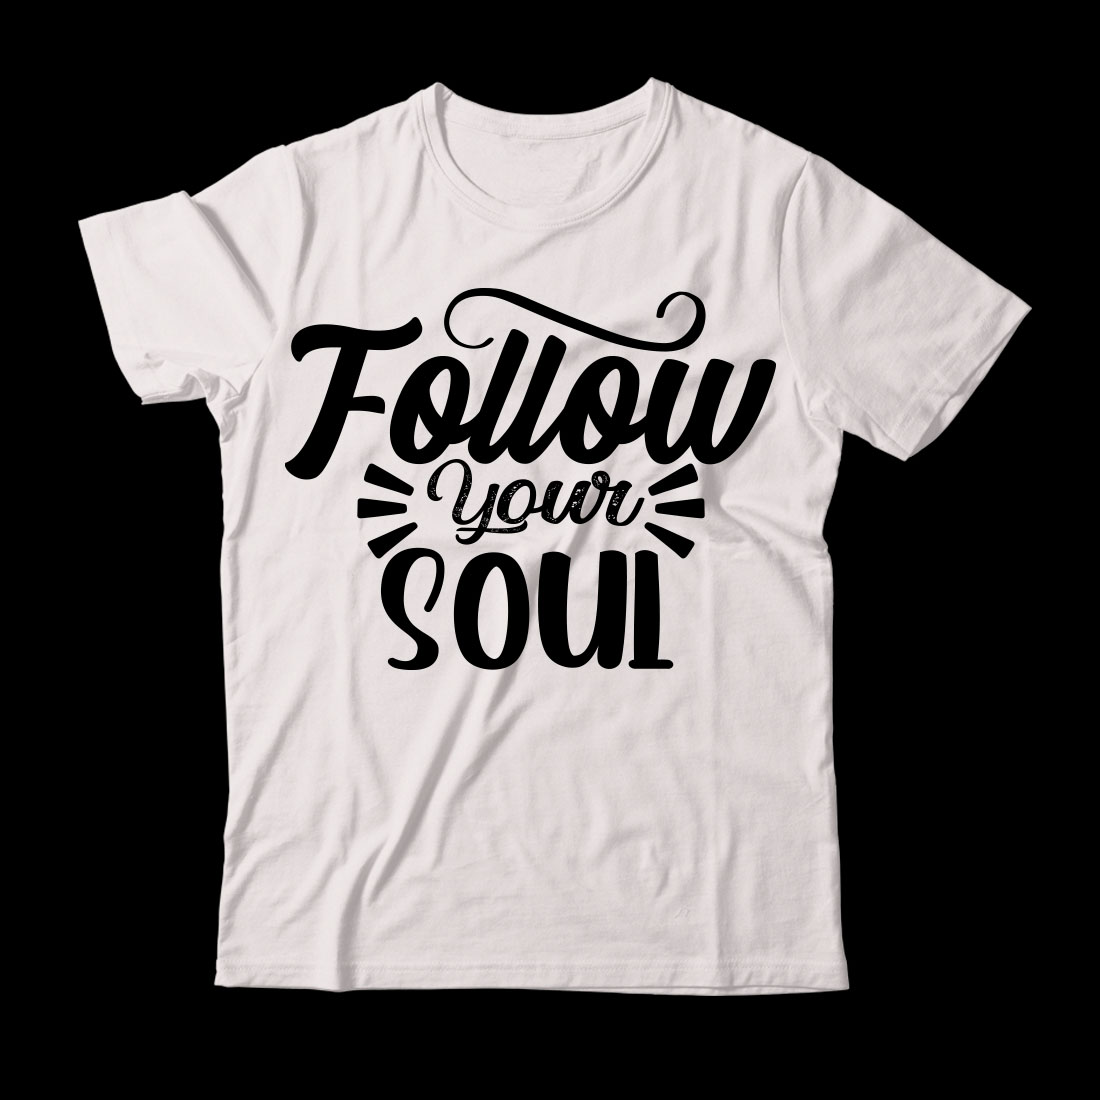 White t - shirt that says follow your soul.